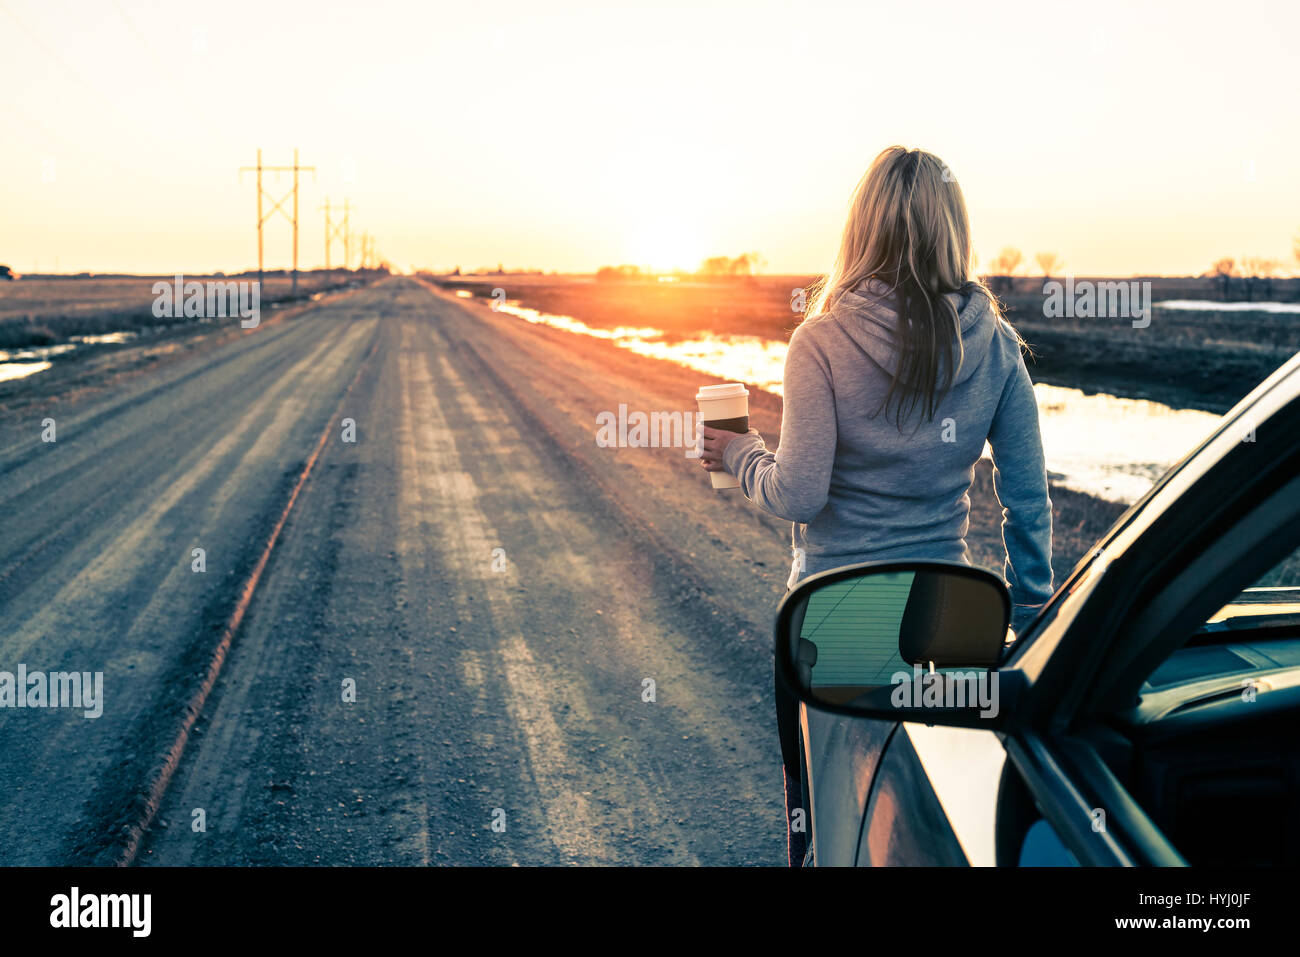 Woman standing with her car, holding caffe cup and watching sunset on the road Stock Photo